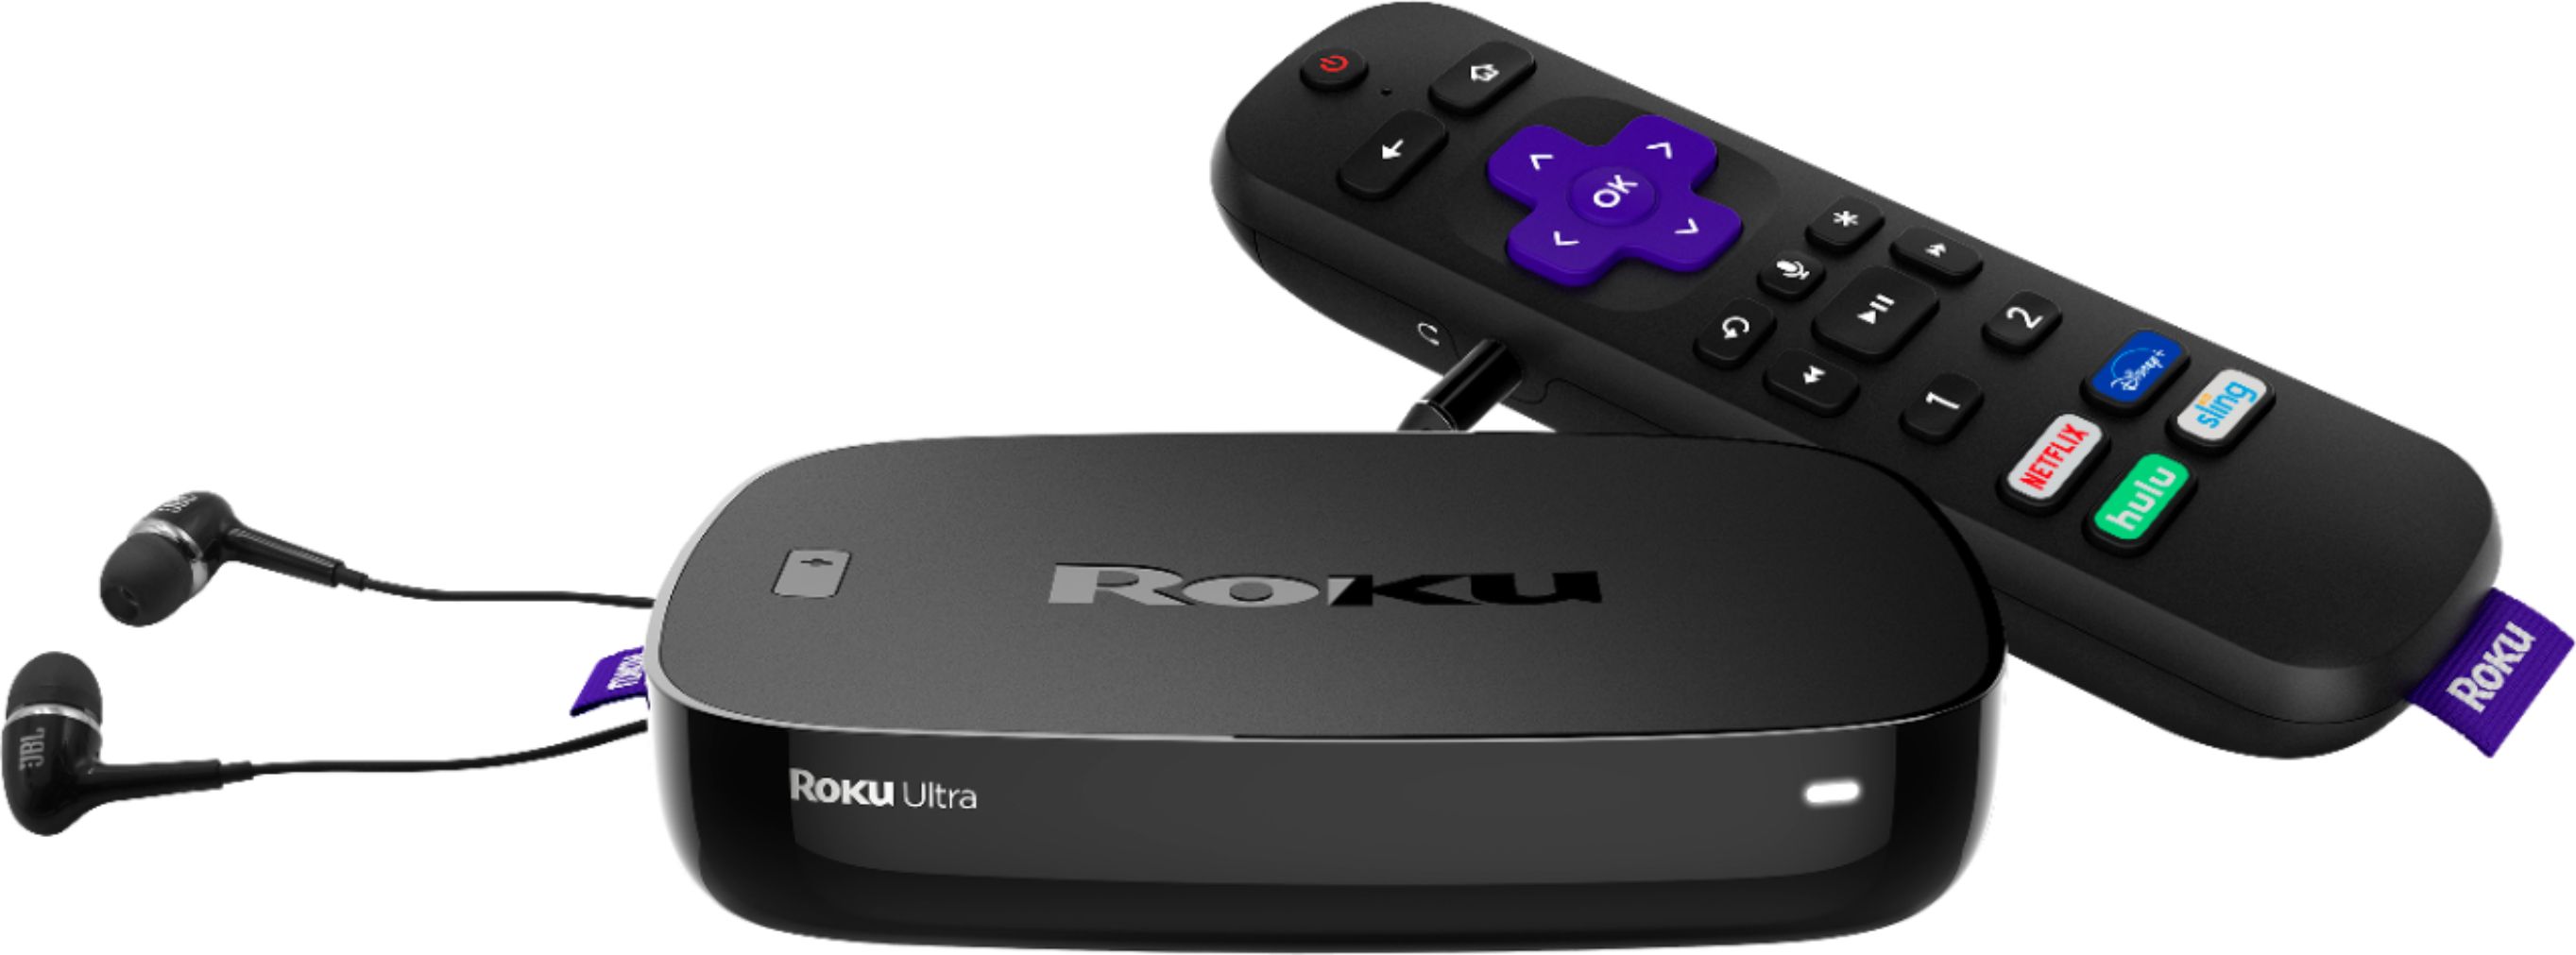 Roku 4K Streaming Media Player with JBL Headphones and Enhanced Voice Remote - Best Buy